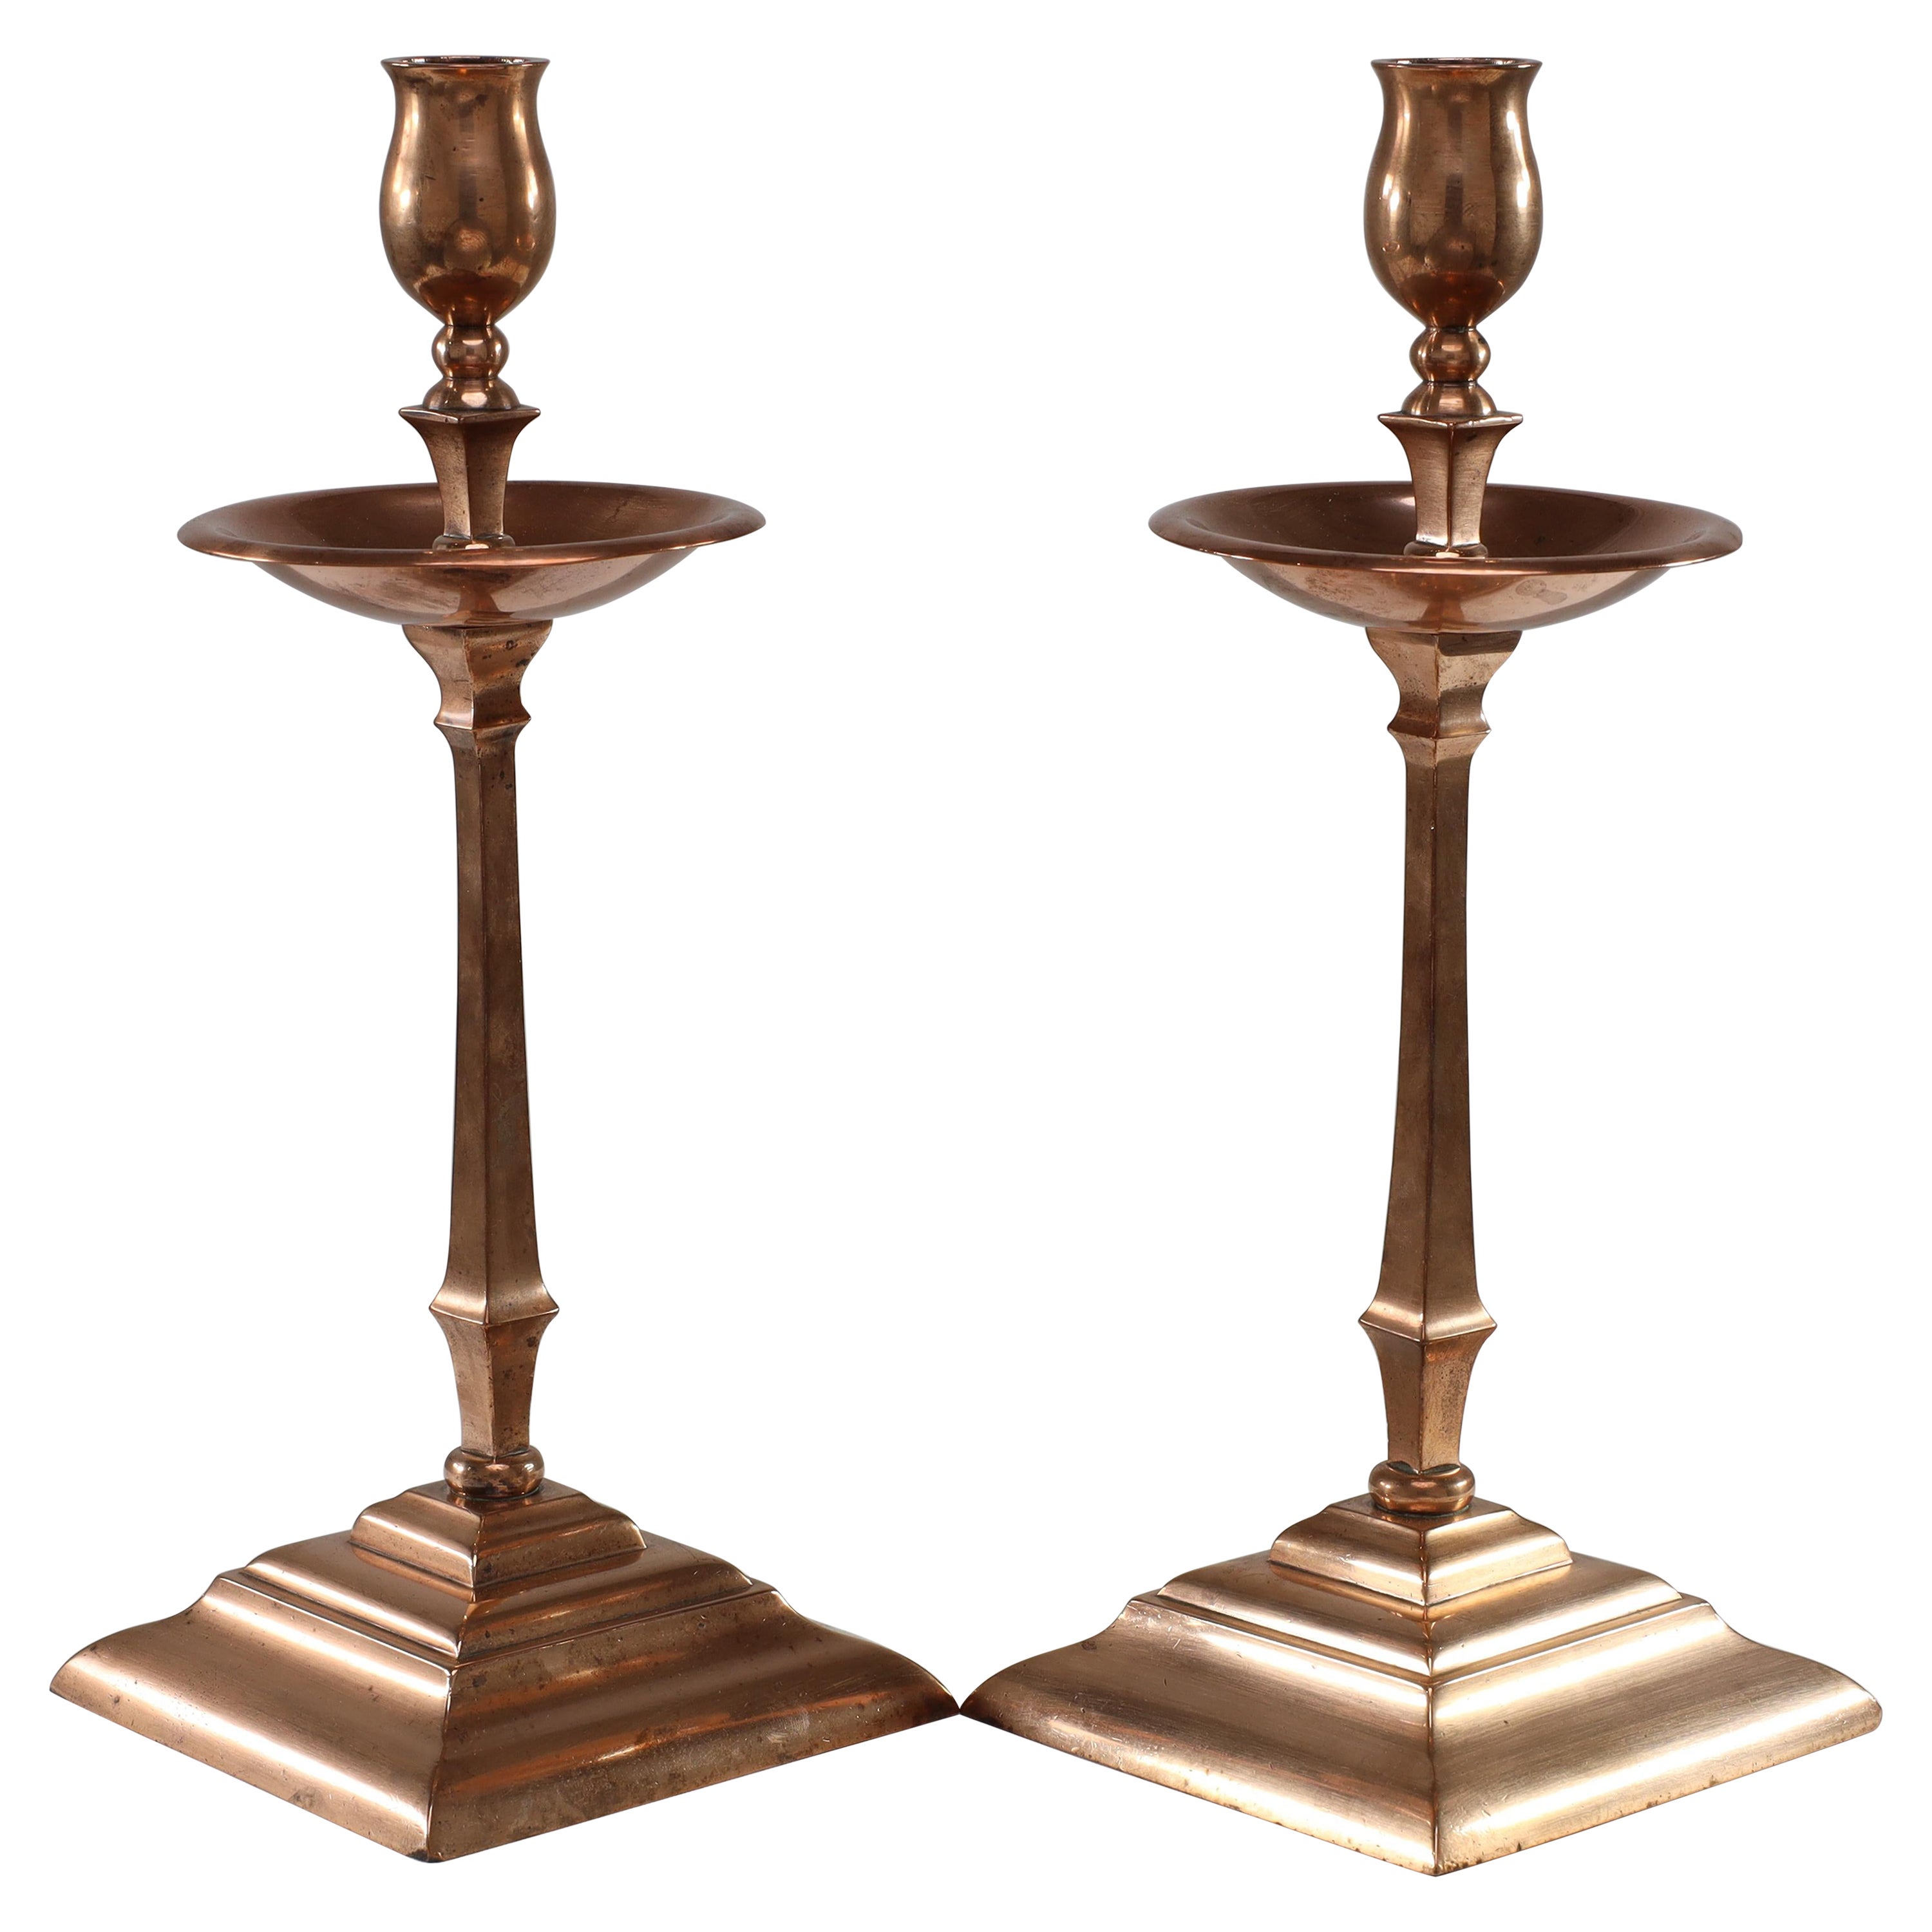 WAS Benson. A pair of Arts and Crafts copper and brass candlesticks.